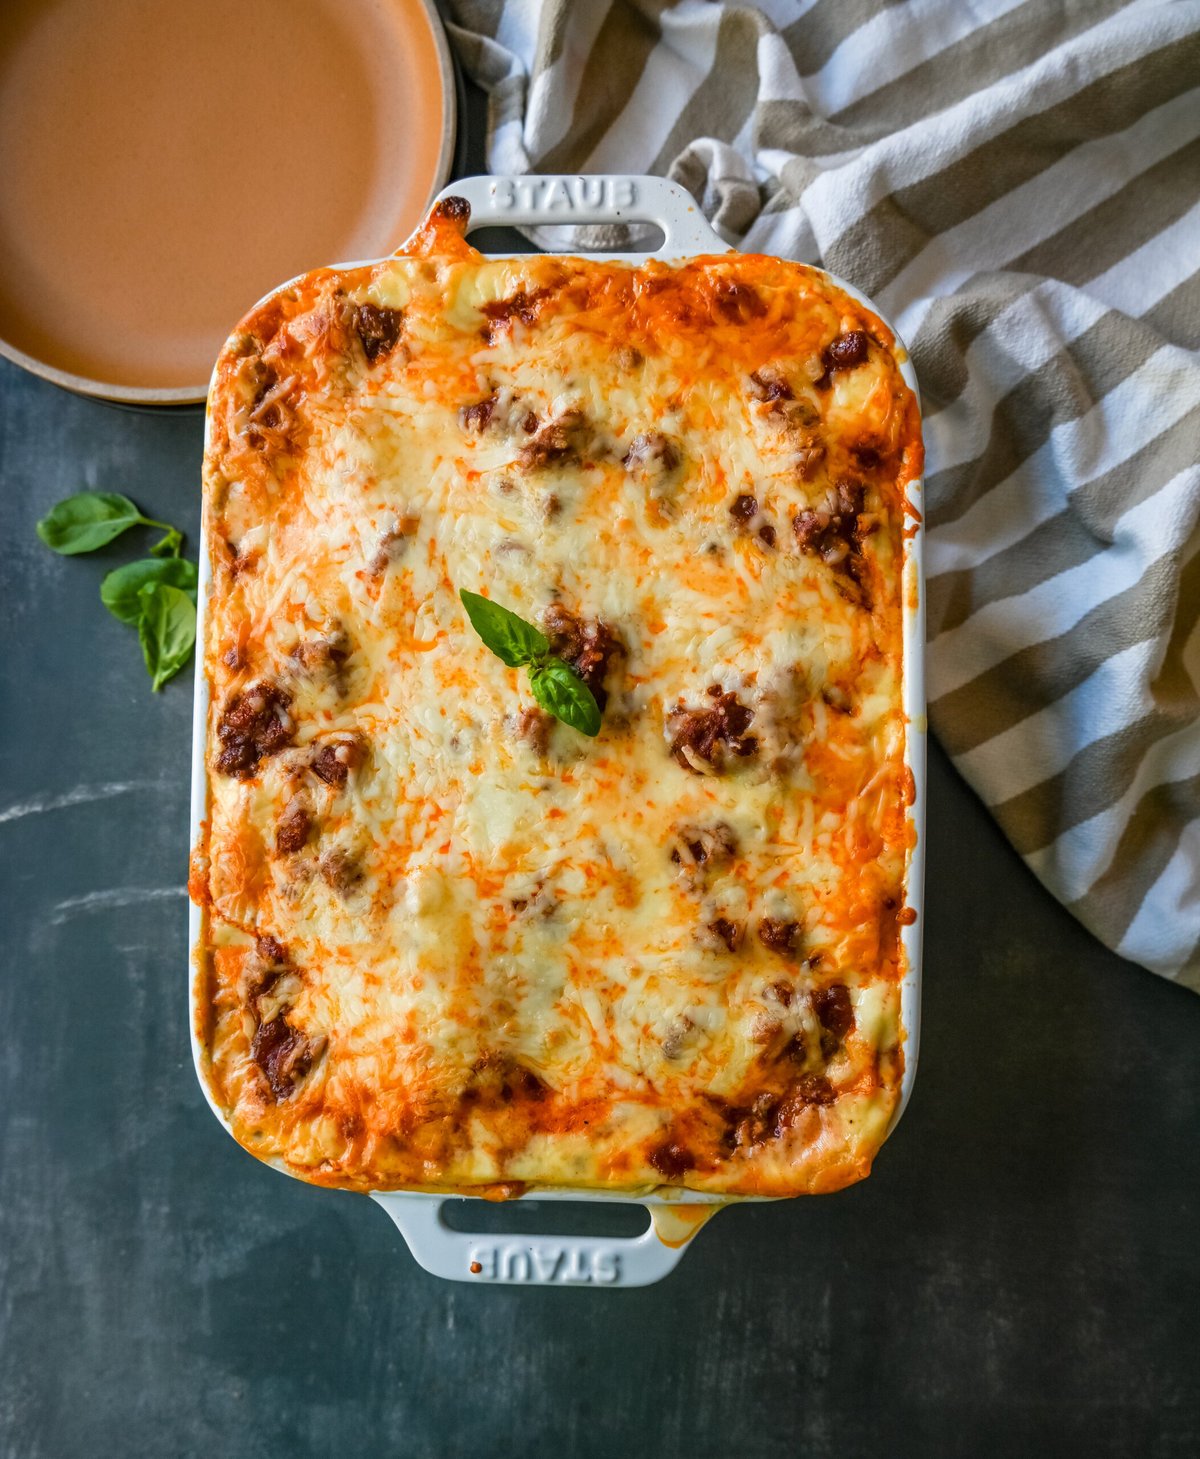 The Best Lasagna Recipe. This Italian Bolognese Lasagna is made with a creamy bechamel sauce with layers of meat sauce and cheese. This homemade lasagna is the best lasagna recipe!